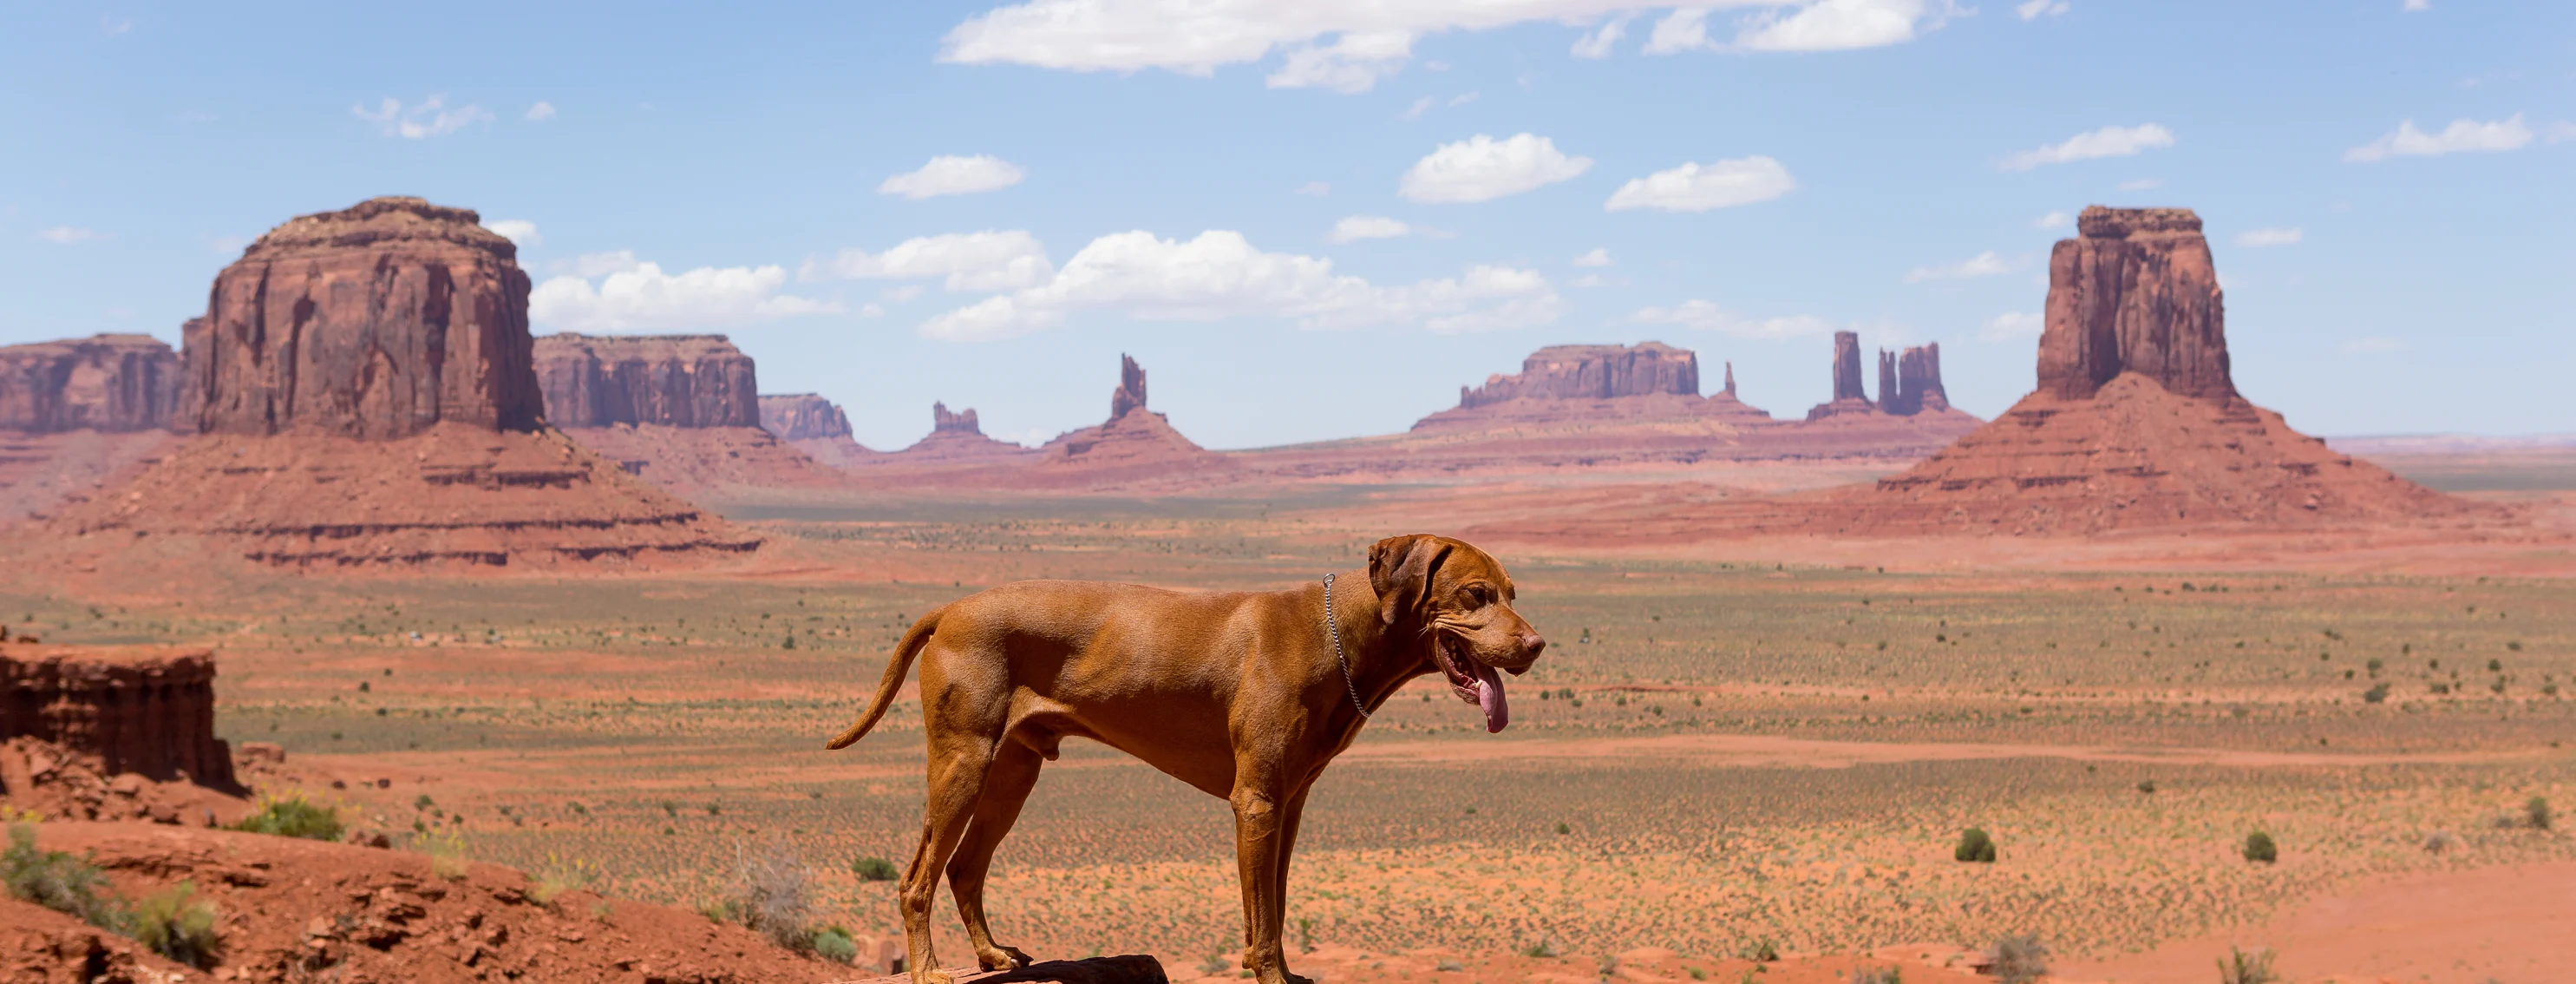 Dog standing on a cliff in a desert